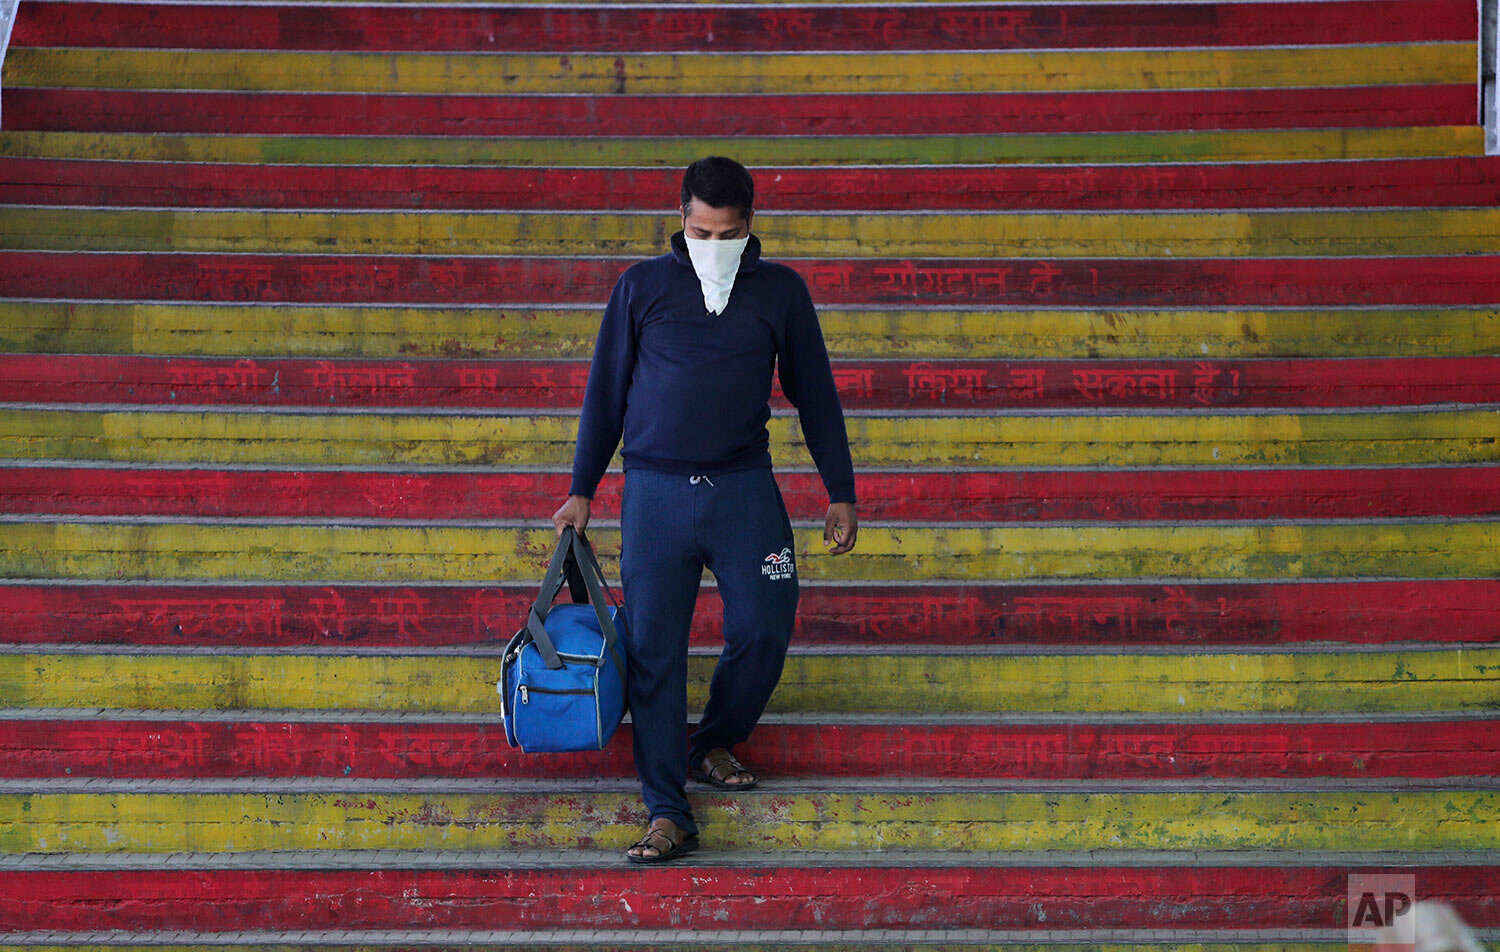  Indian passenger wearing a mask arrives a railway station in Jammu, India, Sunday, March 22, 2020.  (AP Photo/Channi Anand) 